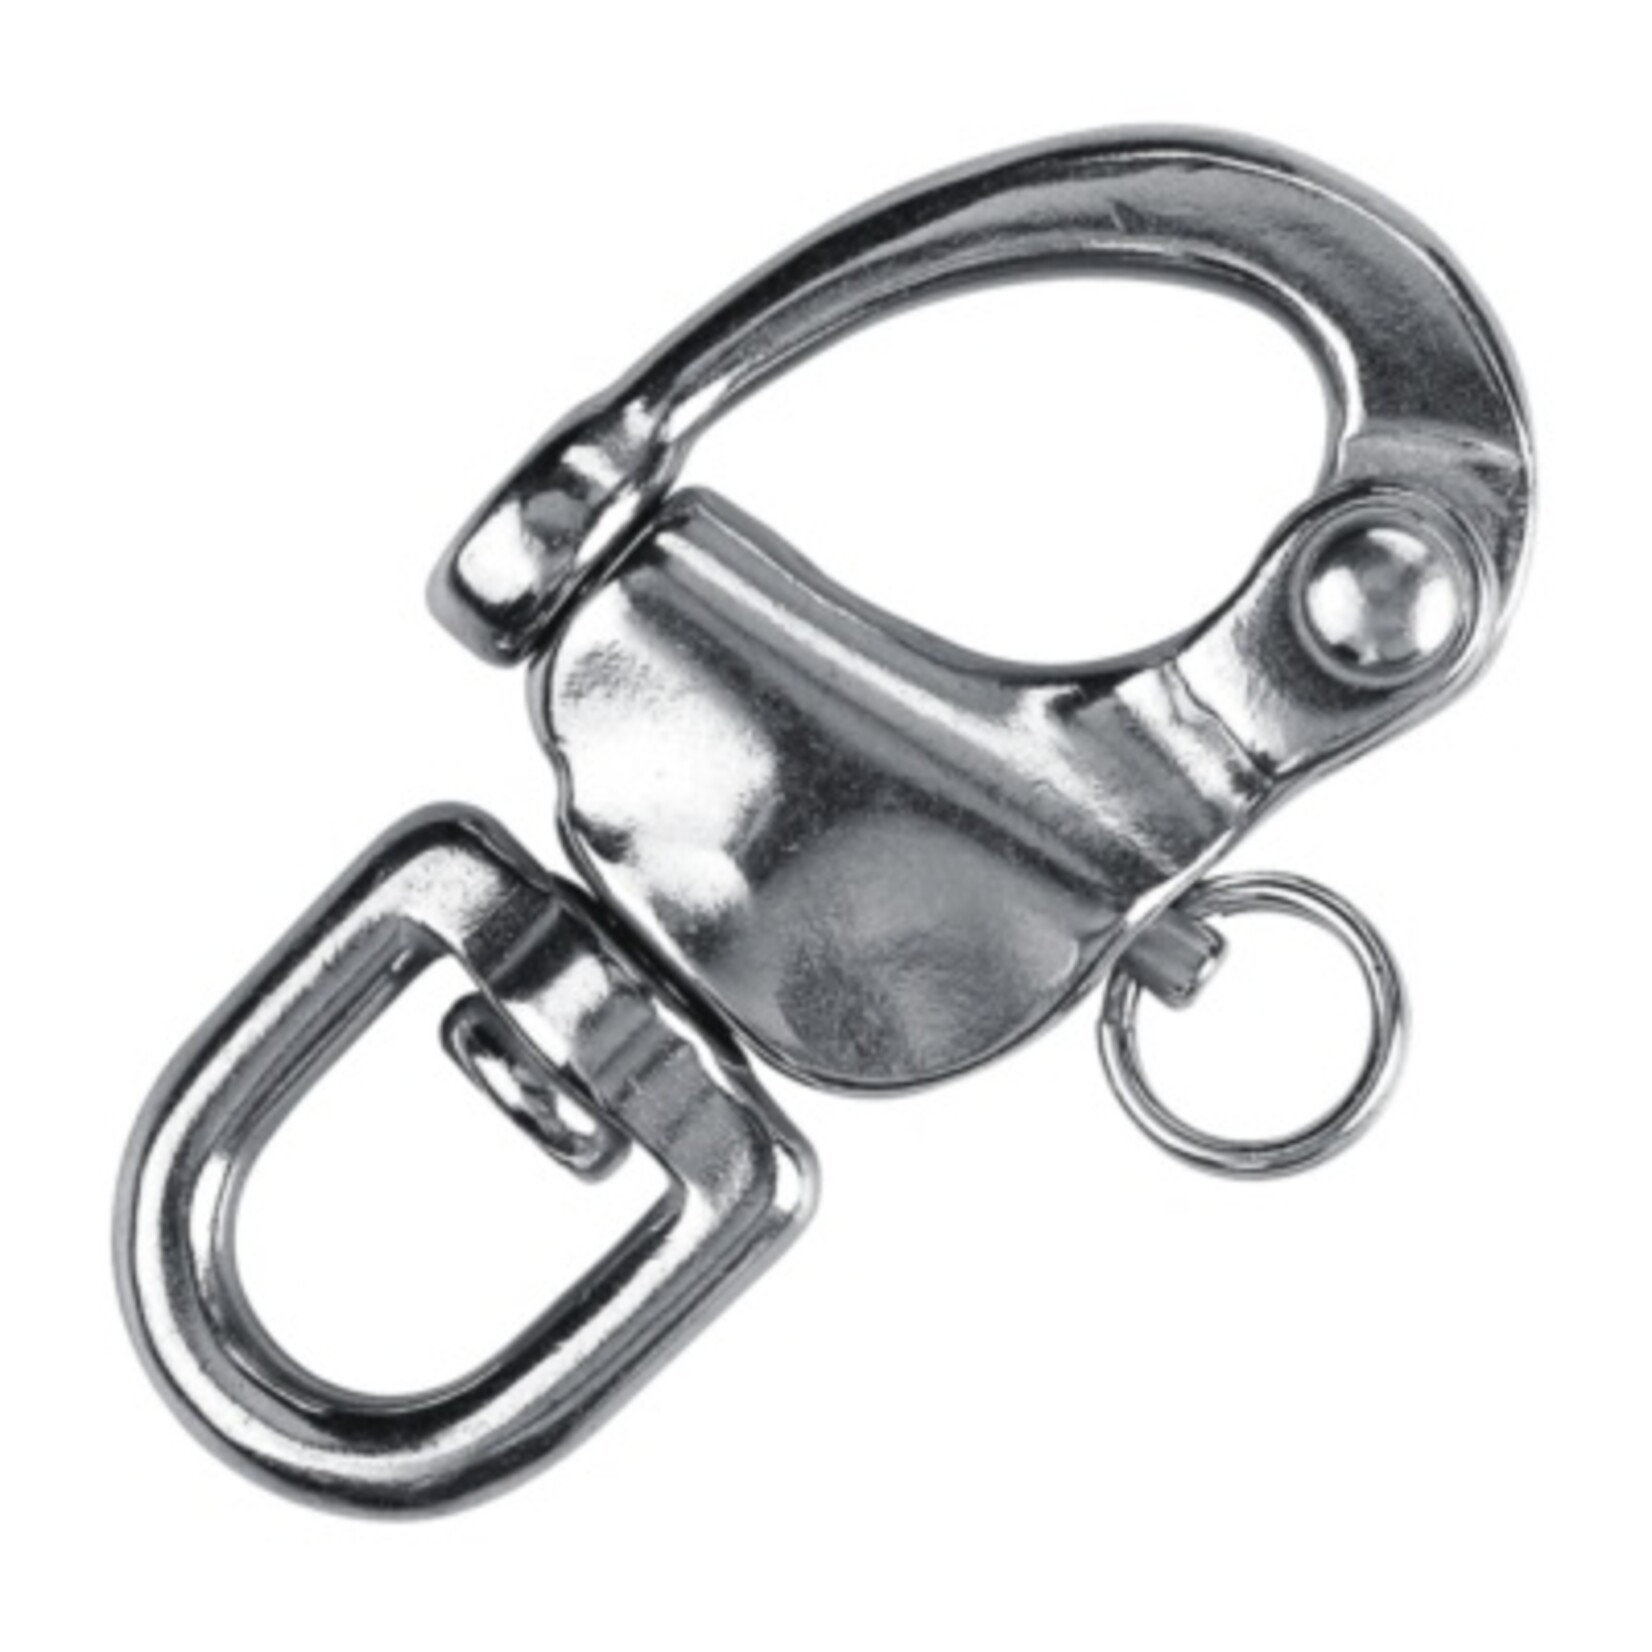 Plastimo Snap shackle s/s with swivel eye 128mm